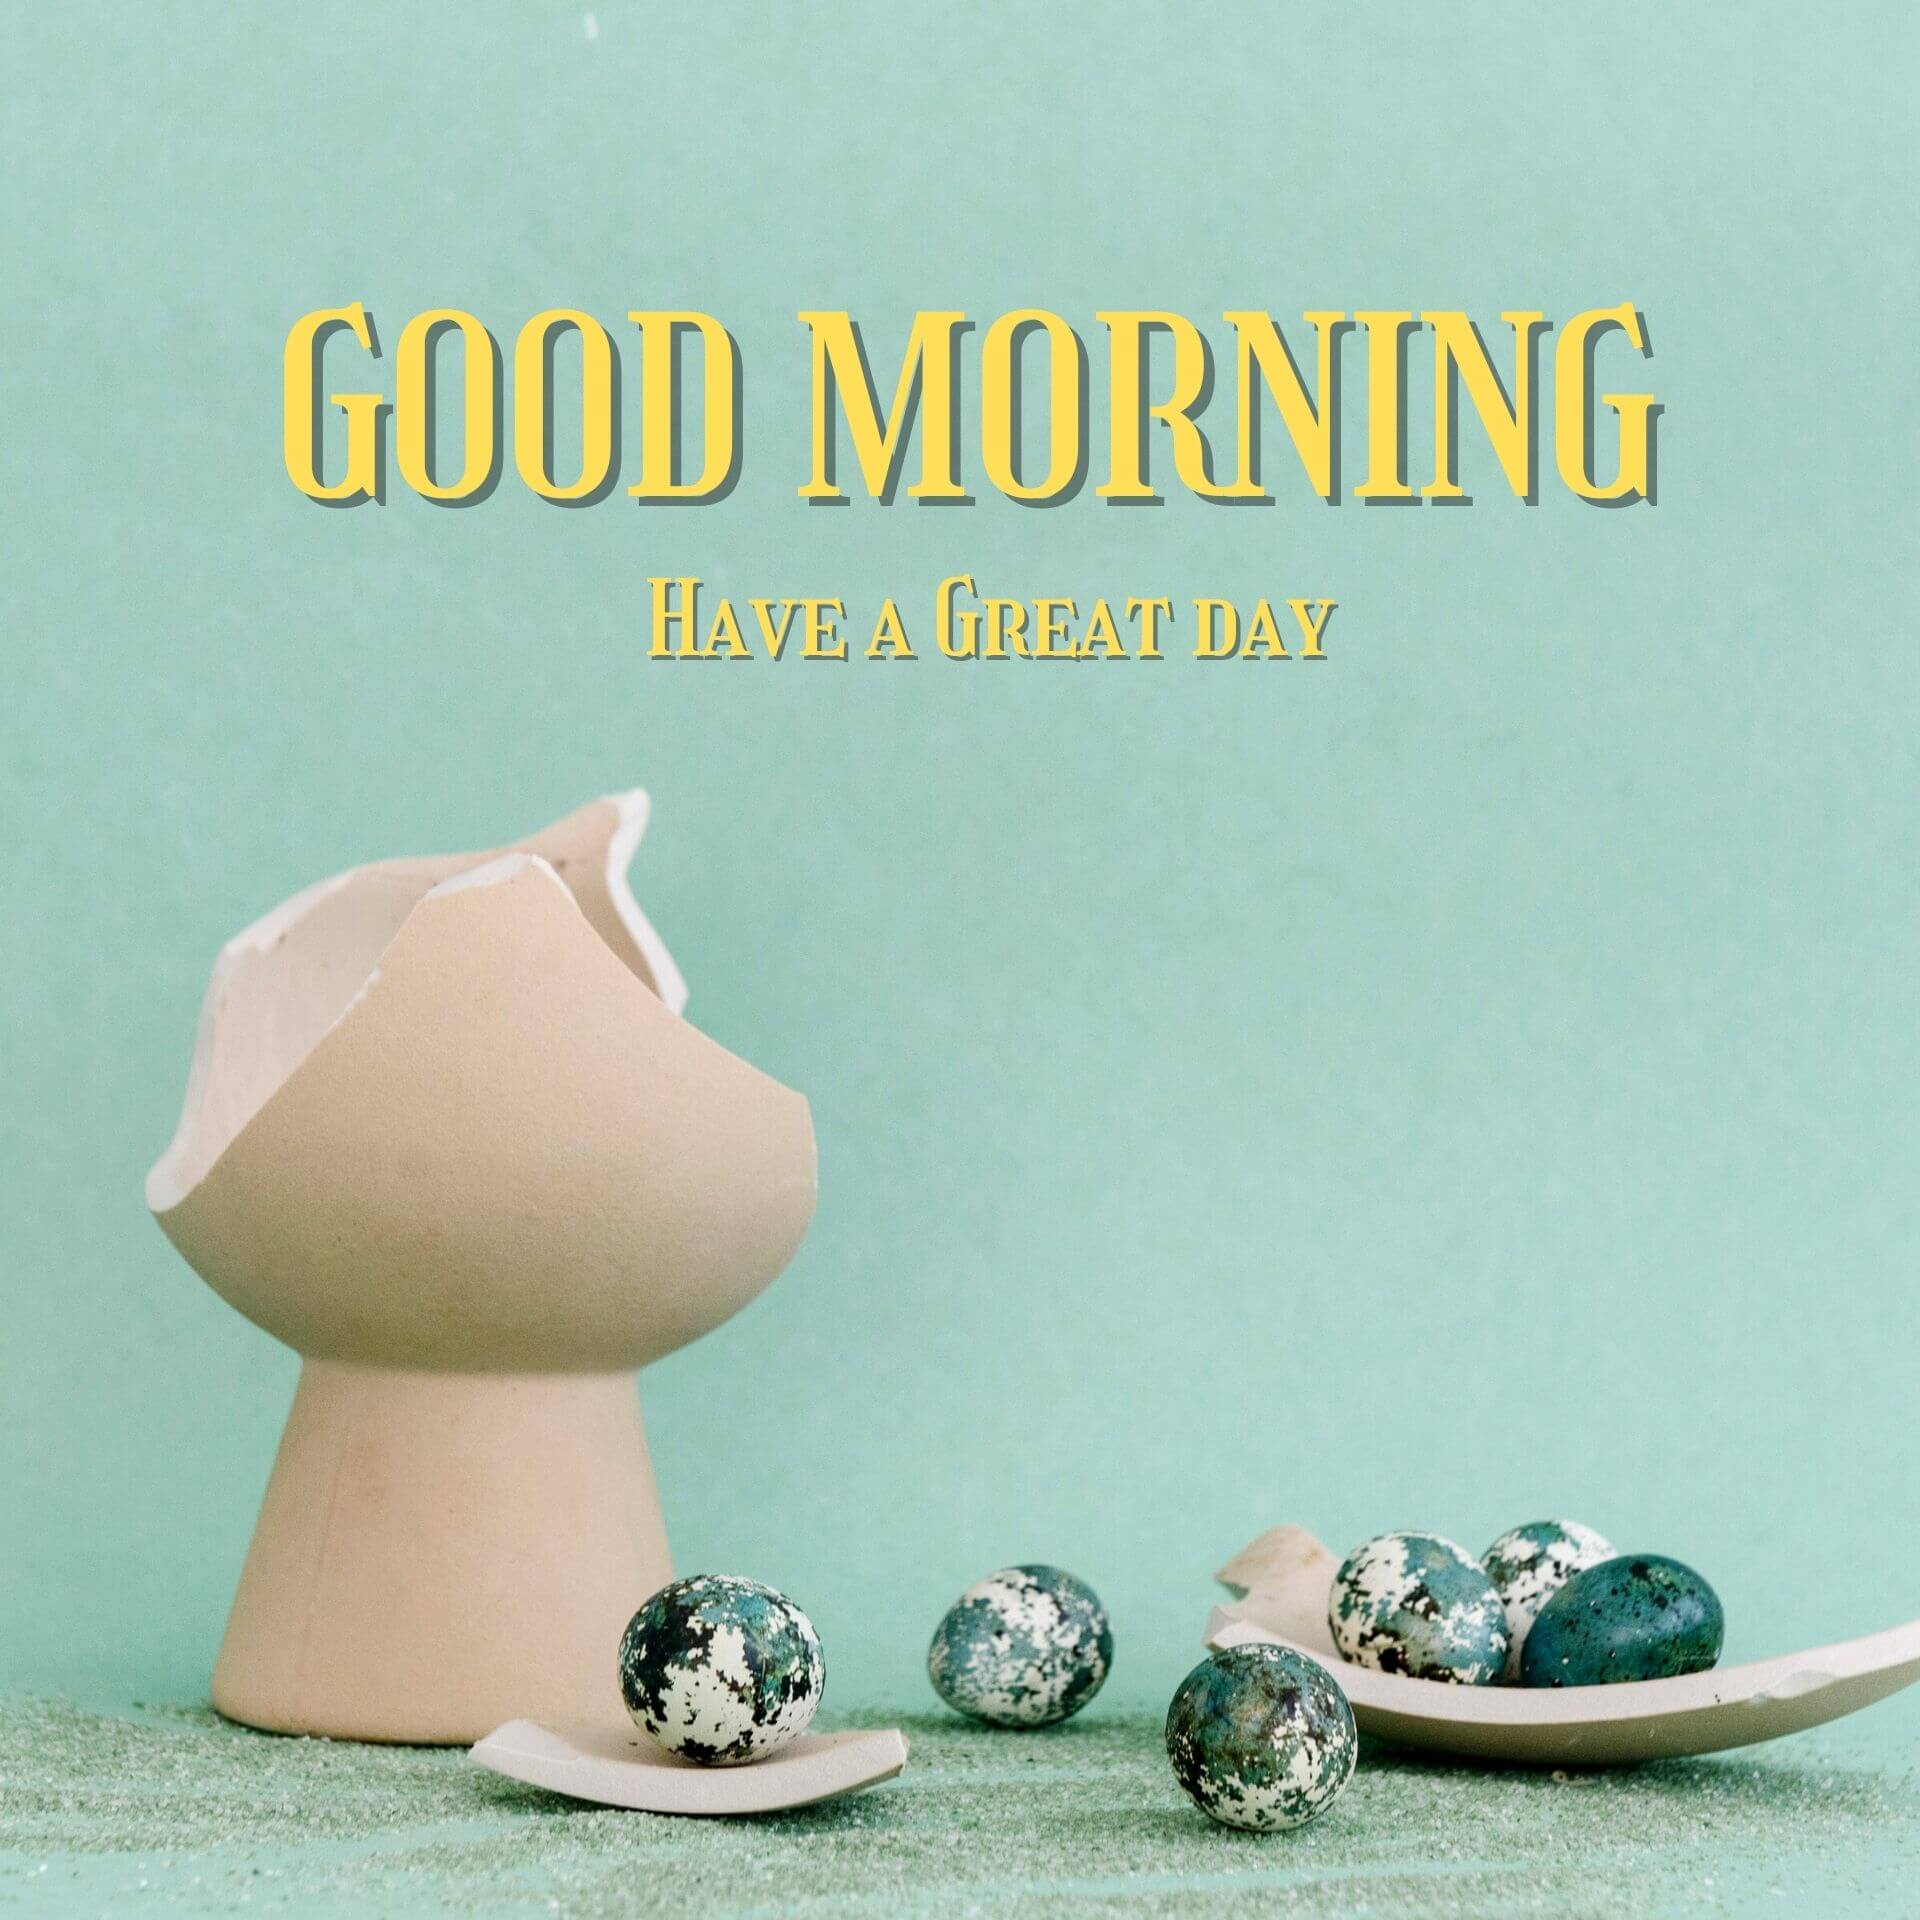 Good morning have a nice day Wallpaper Free Download 3